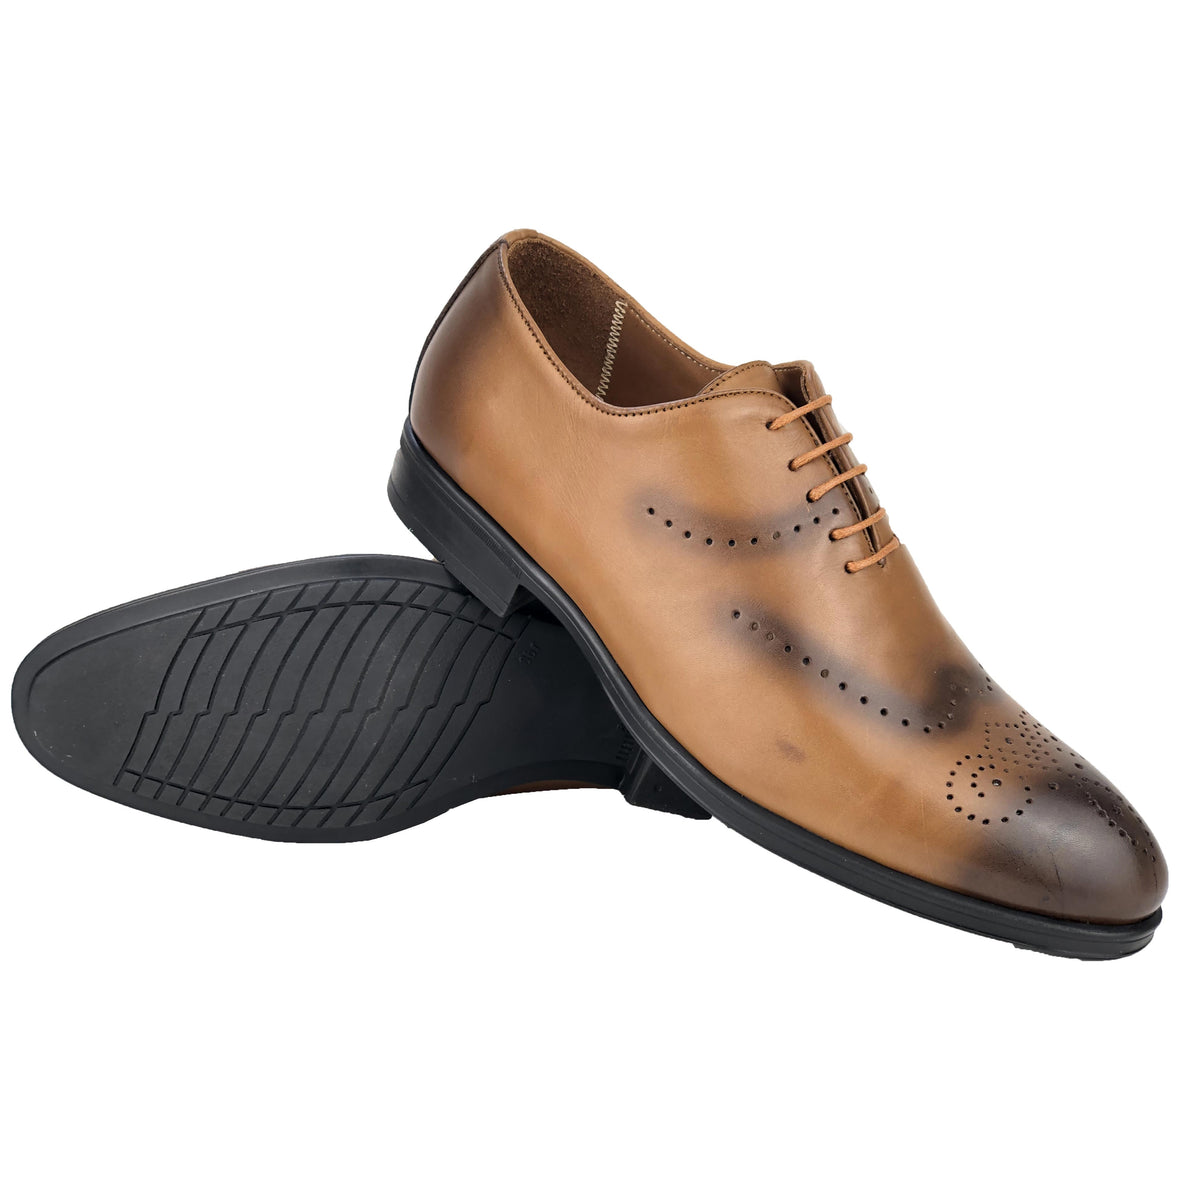 CH0067-015 - Chaussure cuir taba - deluxe-maroc